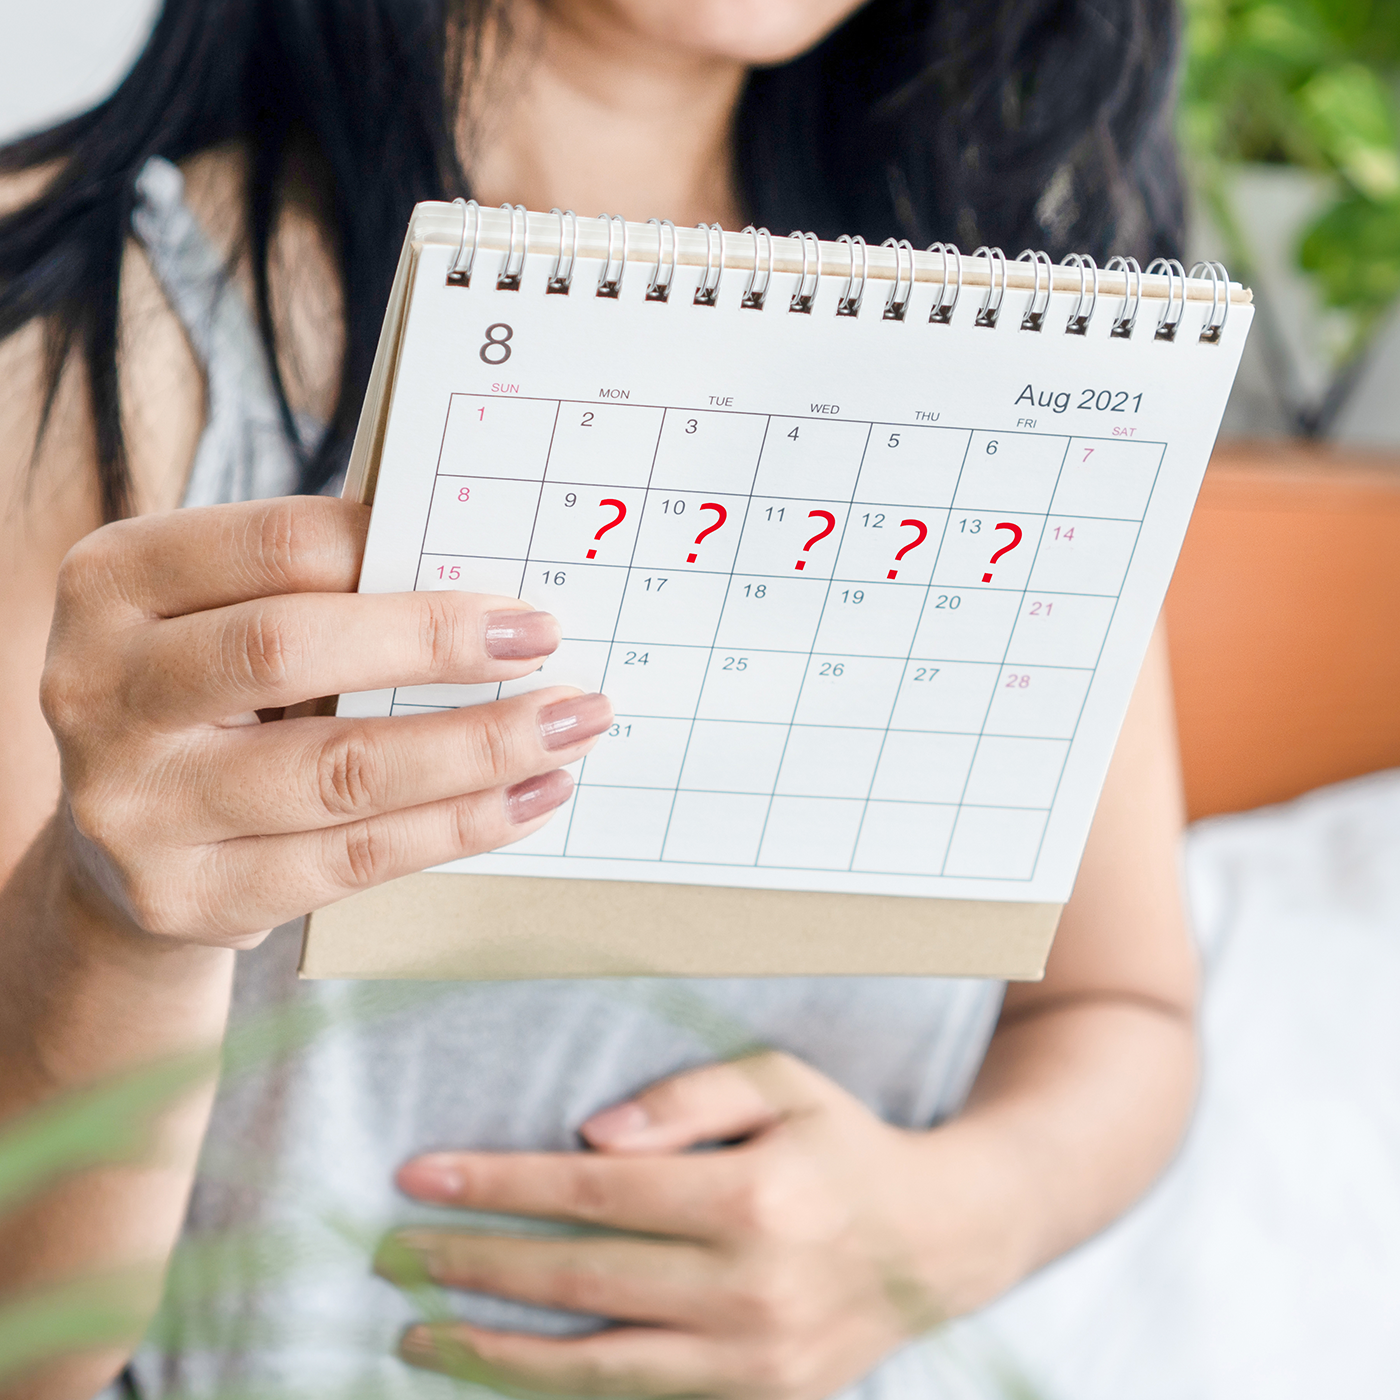 Woman with hand on belly holding desk calendar with red question marks on several days.